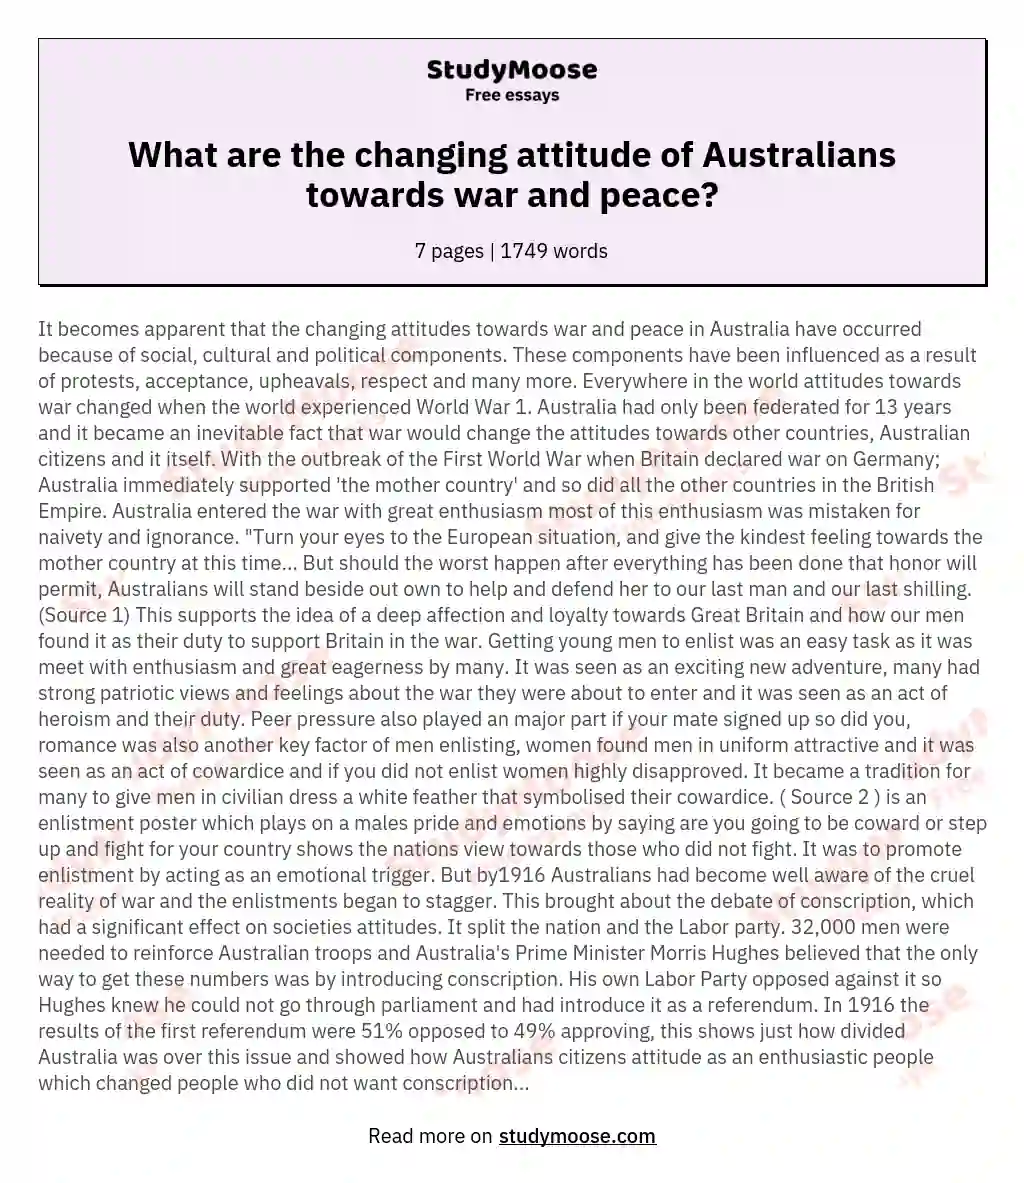 What are the changing attitude of Australians towards war and peace?